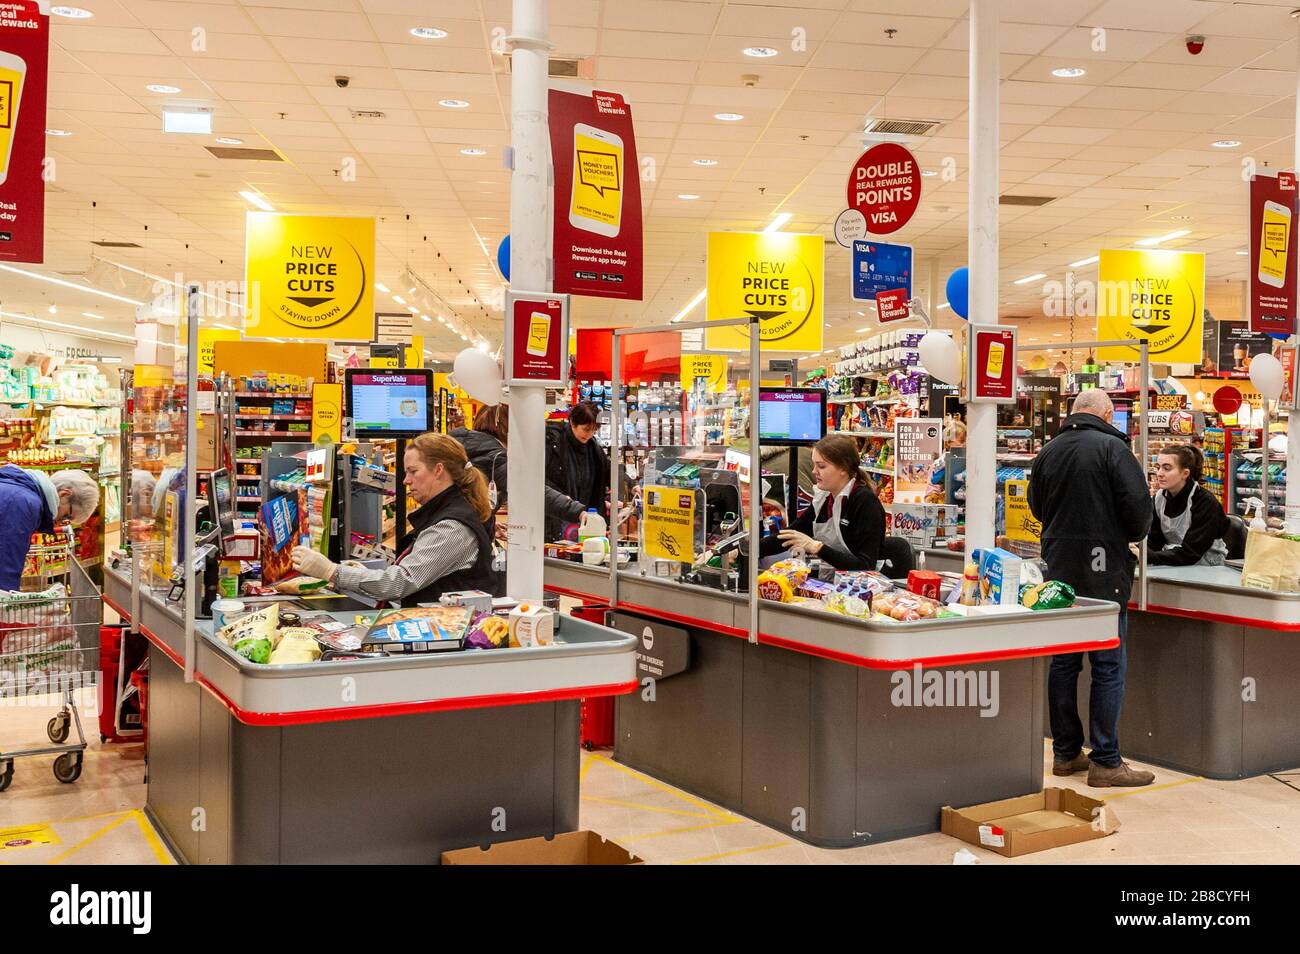 Bandon, West Cork, Ireland. 21st Mar, 2020. Supervalu has installed plastic protective screens at its checkouts to follow the government's social distancing guidelines due to the  COVID-19 virus.  The screens are designed to protect checkout staff, who have also been issued with disposable aprons. Credit: Andy Gibson/Alamy Live News Stock Photo